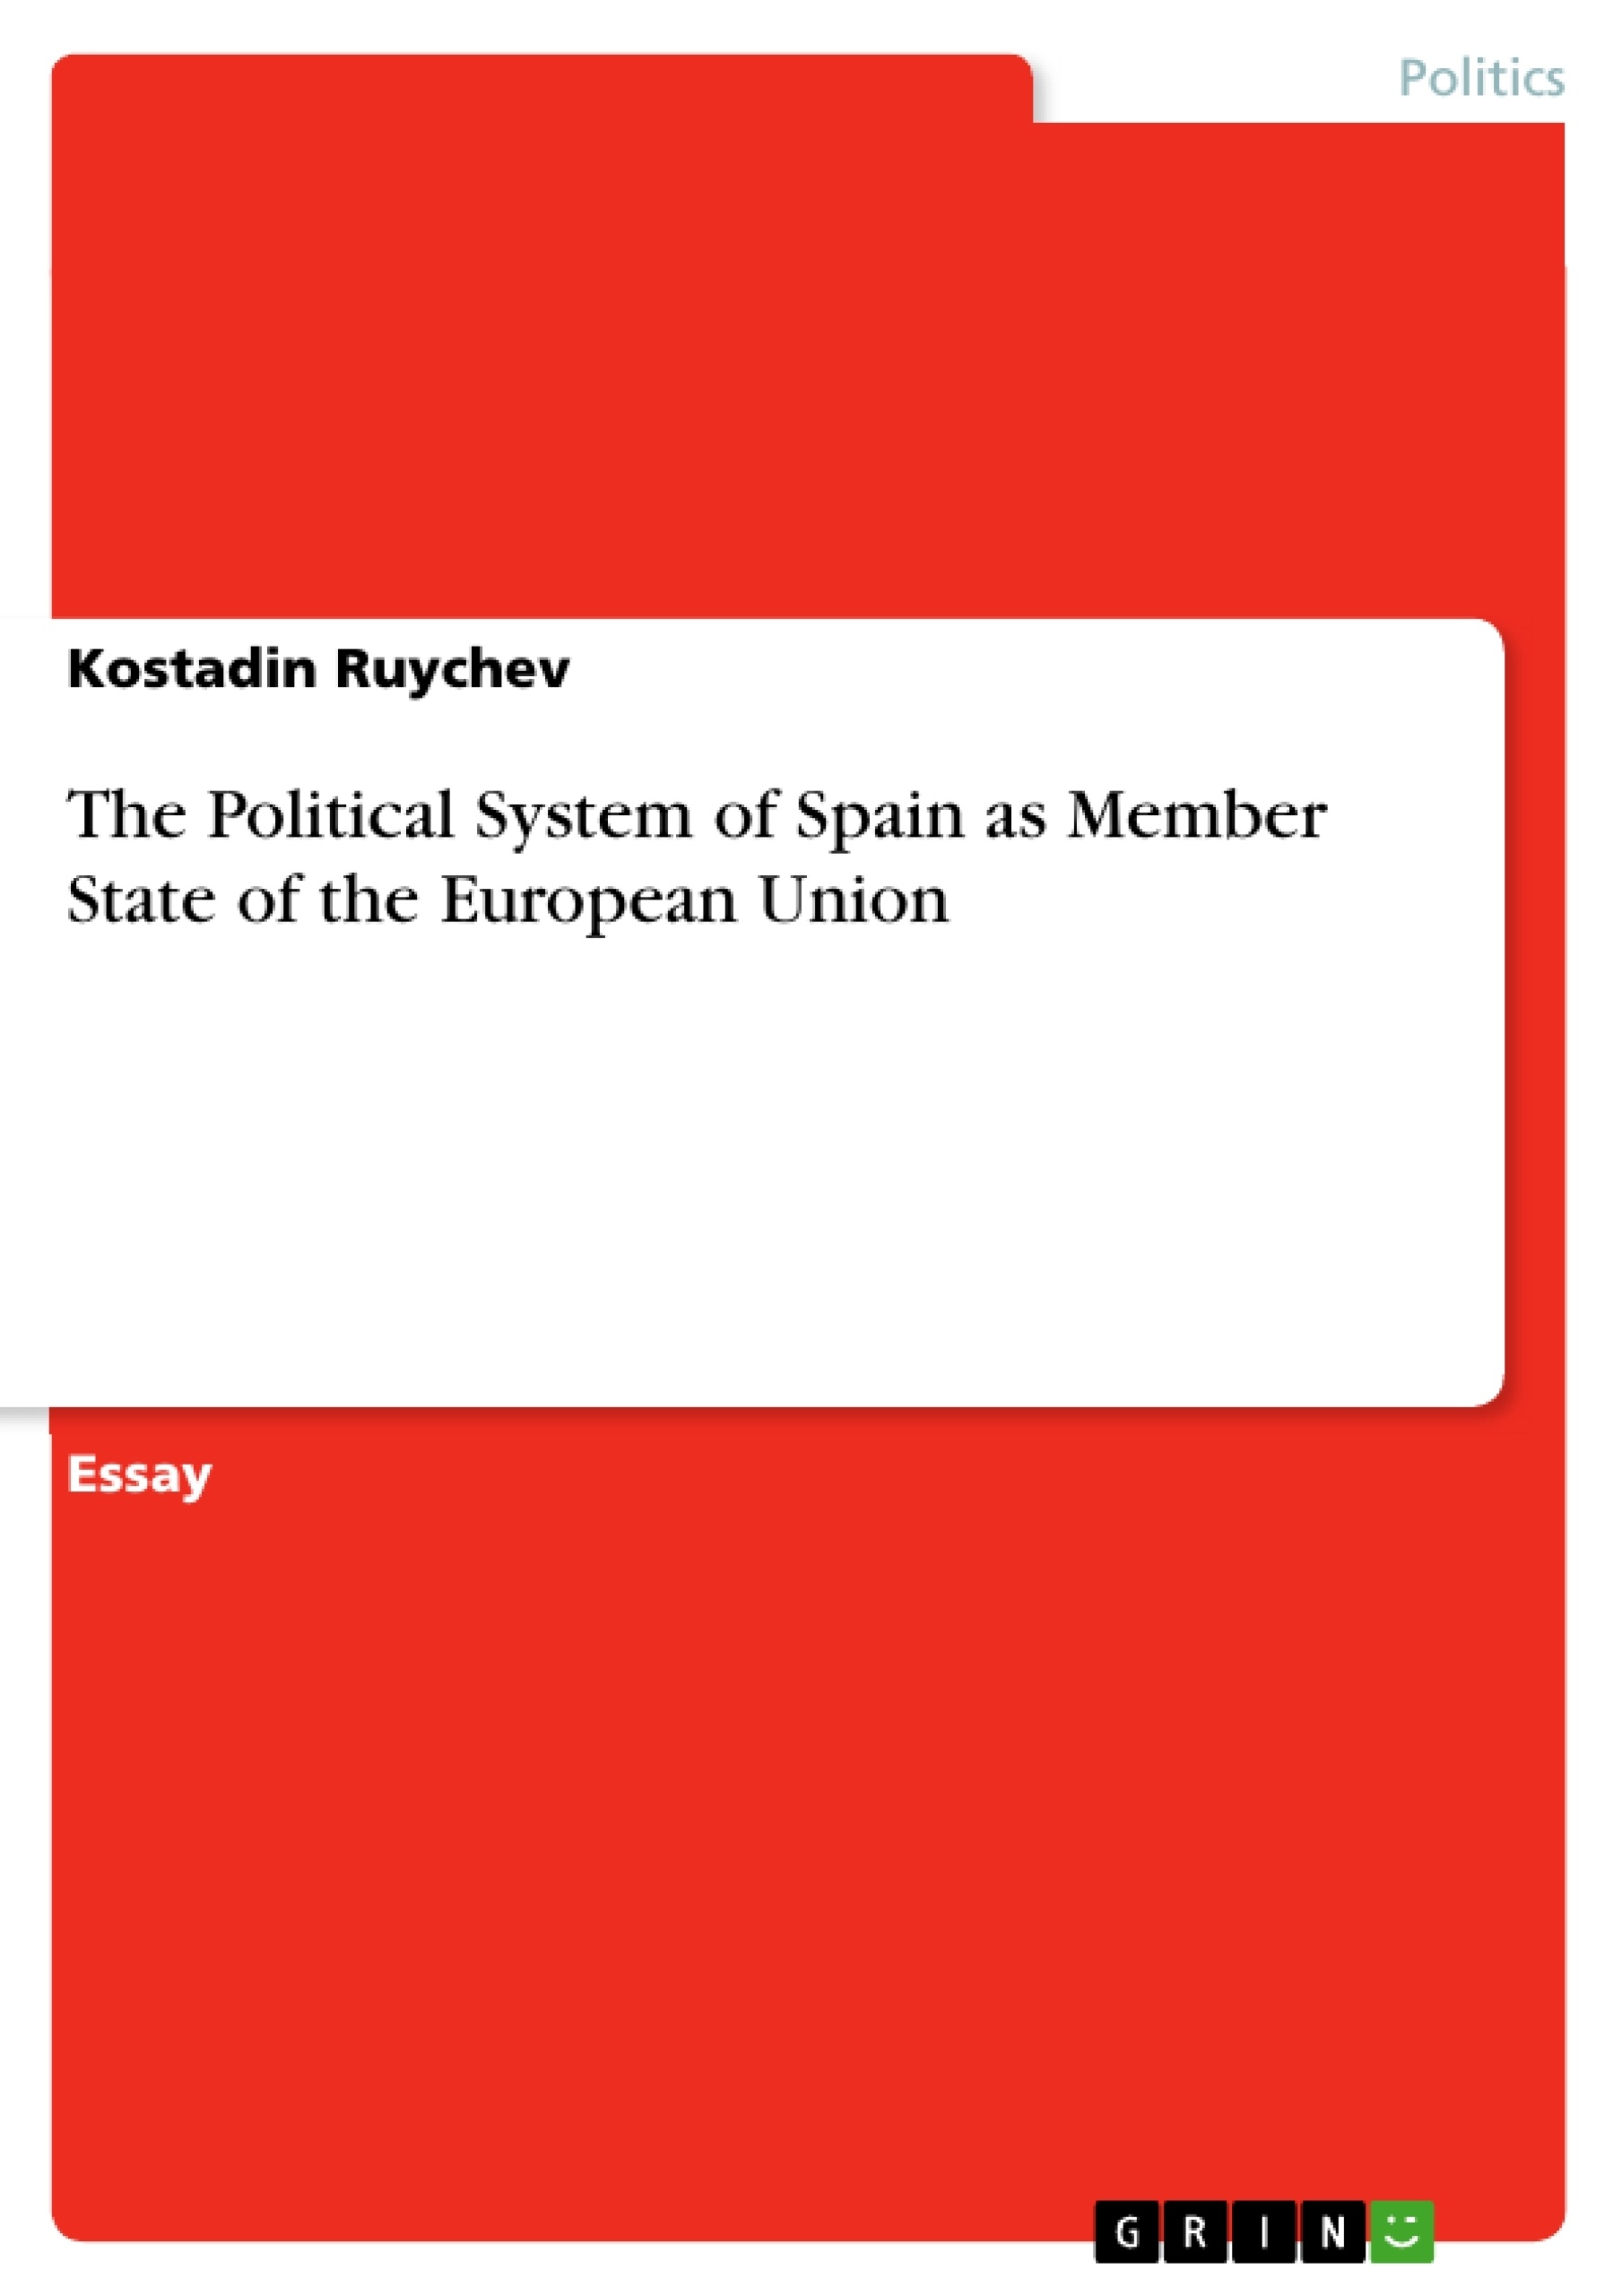 Titel: The Political System of Spain as Member State of the European Union